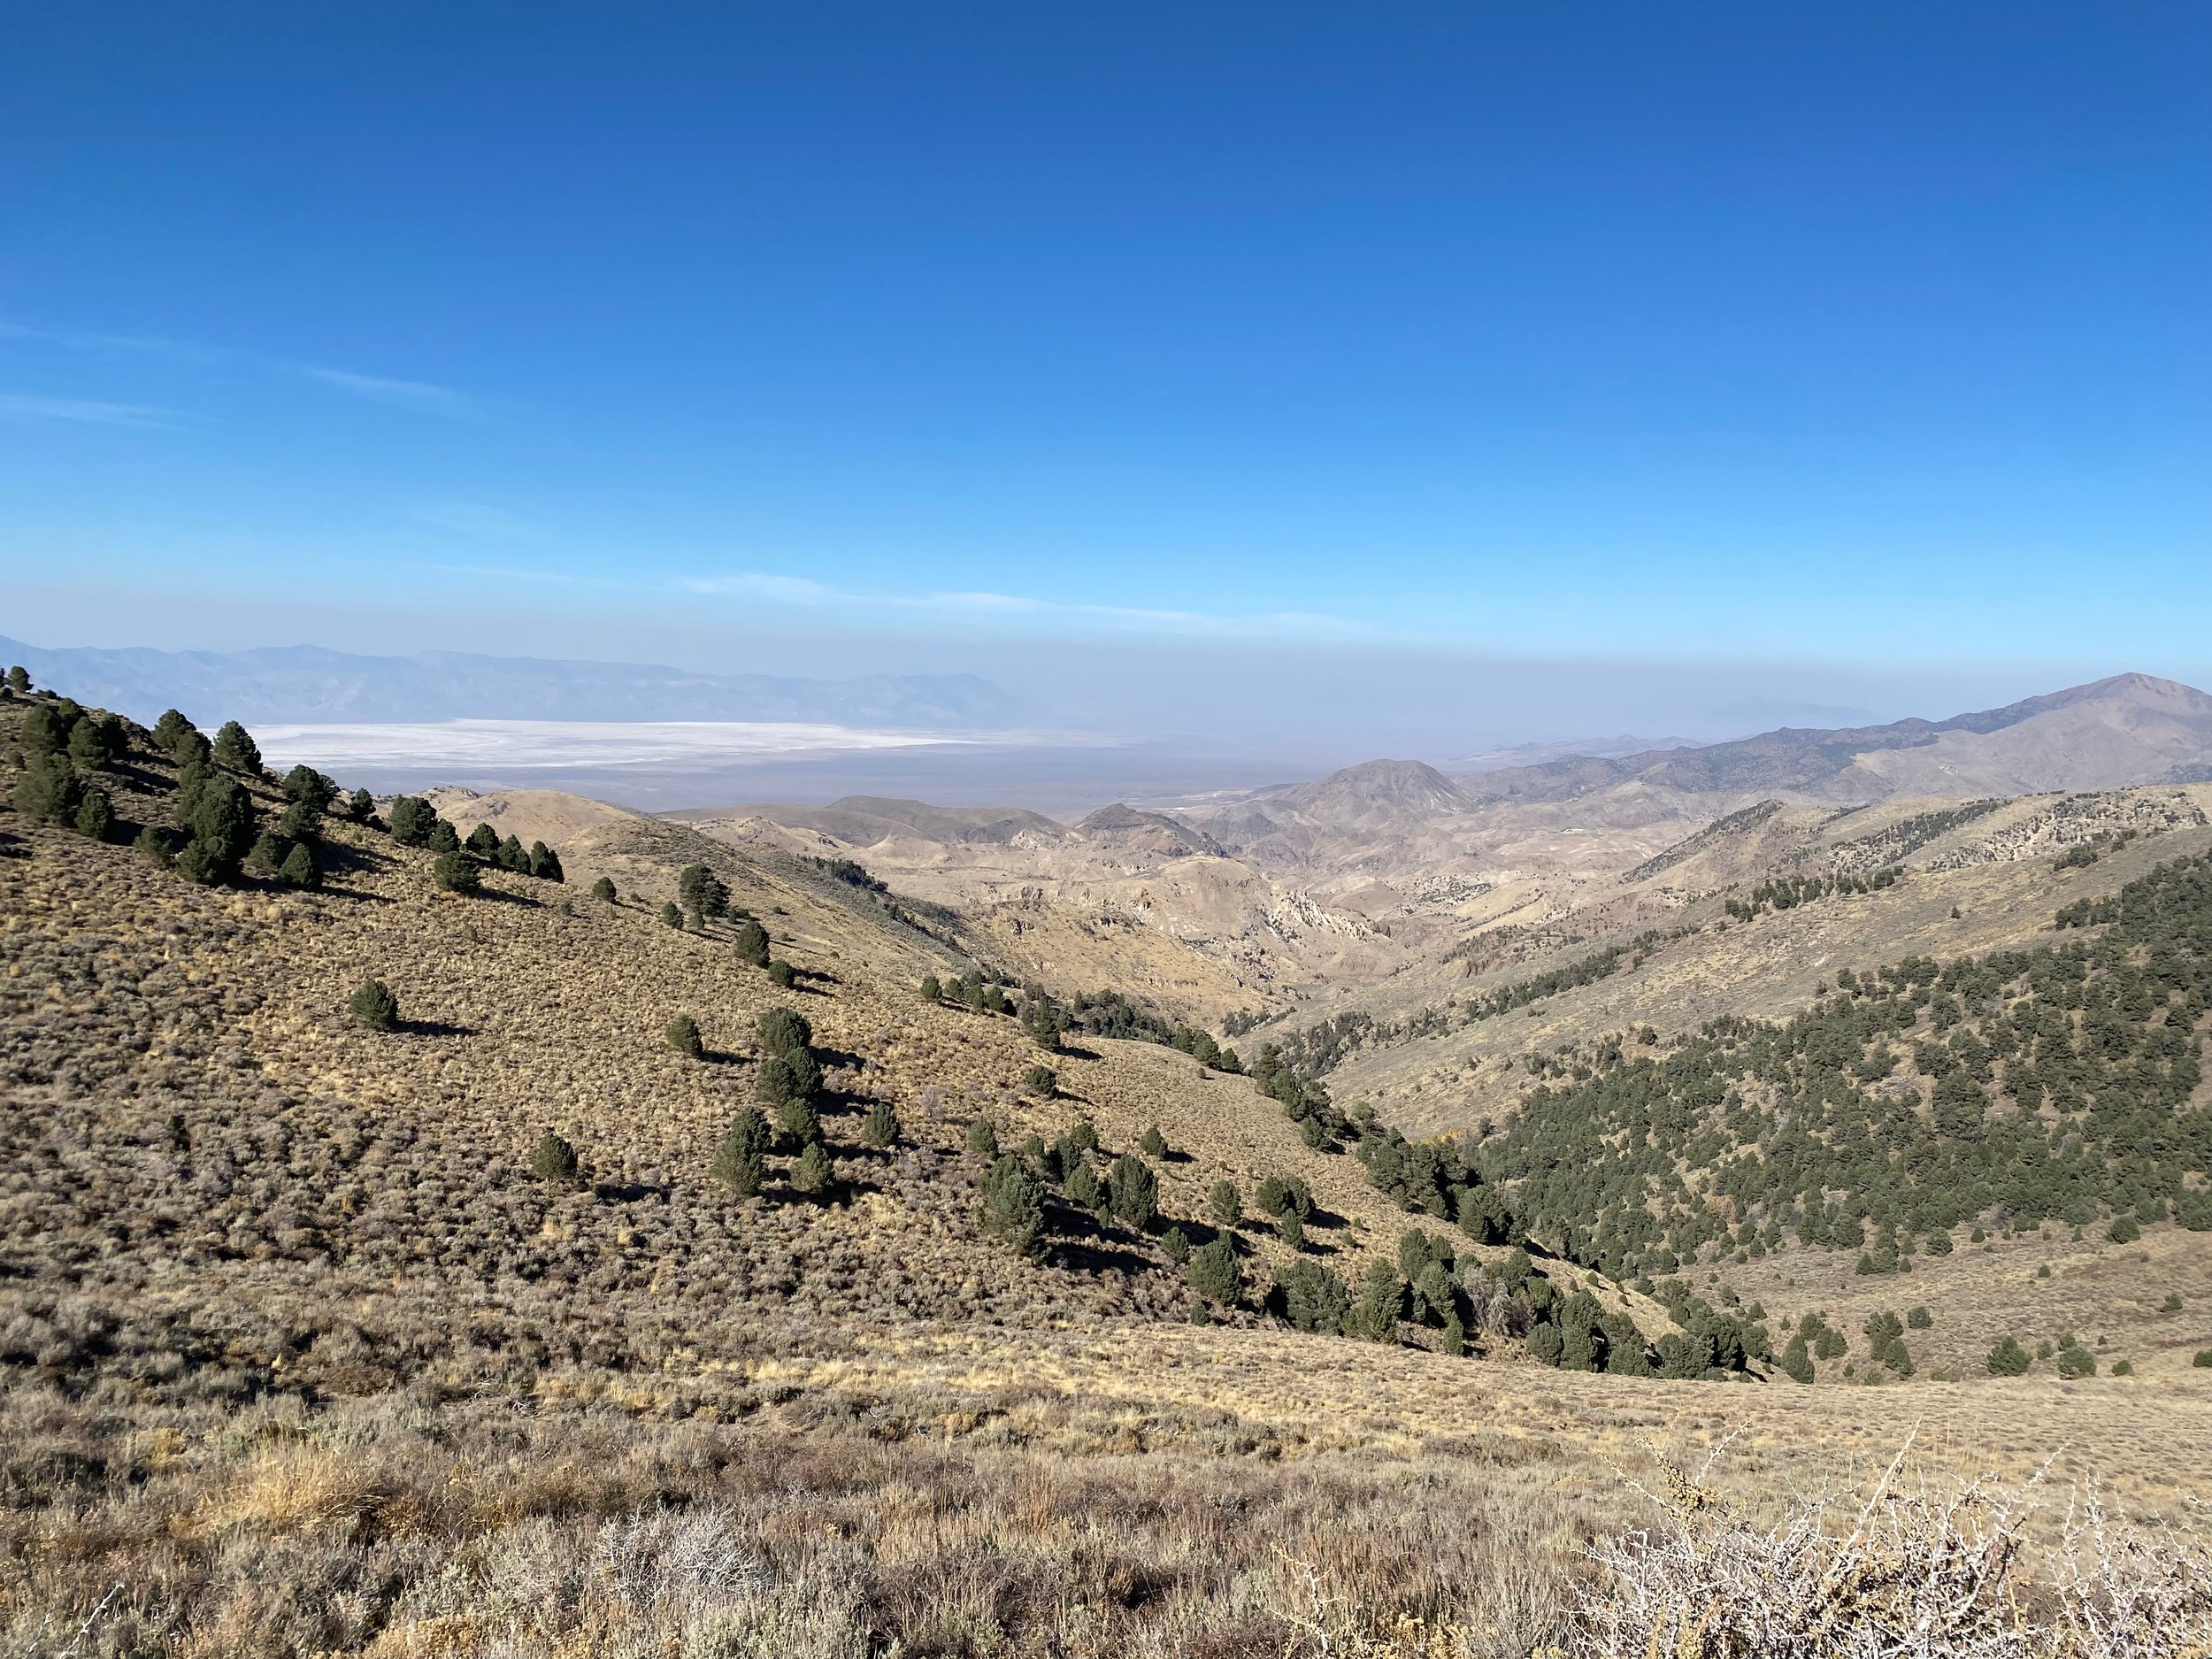  Dixie Valley below in the smoke from our summer fire season. 